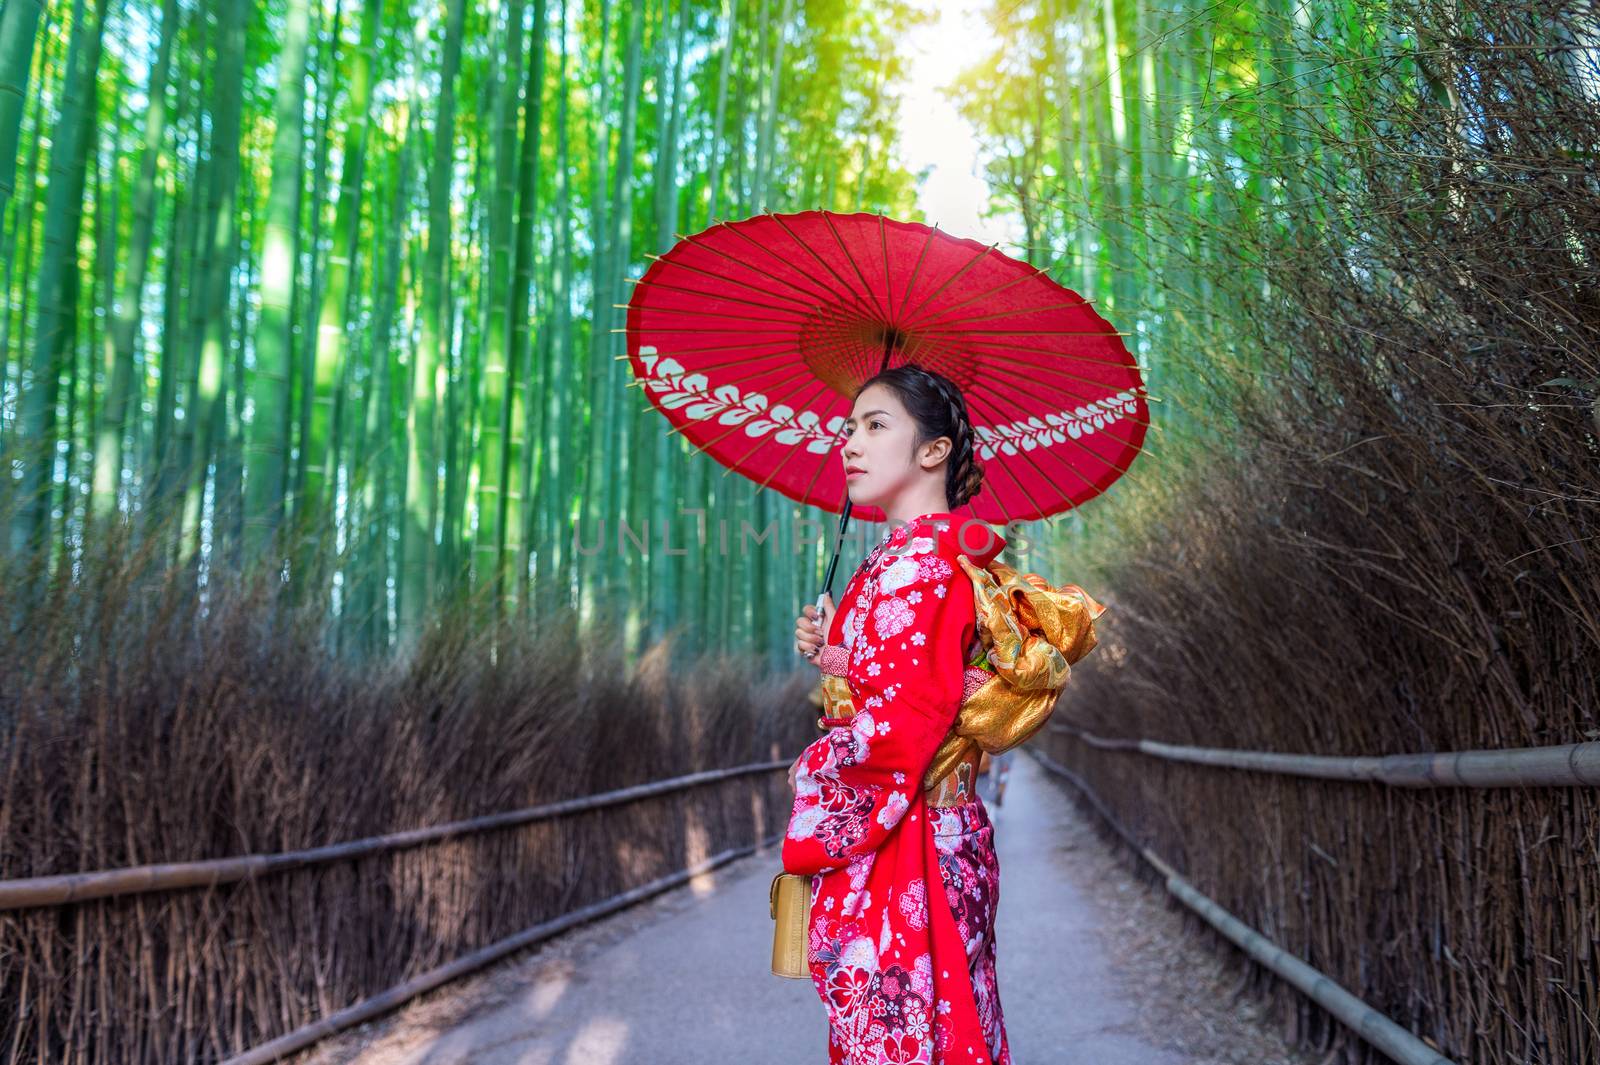 Bamboo Forest. Asian woman wearing japanese traditional kimono at Bamboo Forest in Kyoto, Japan. by gutarphotoghaphy